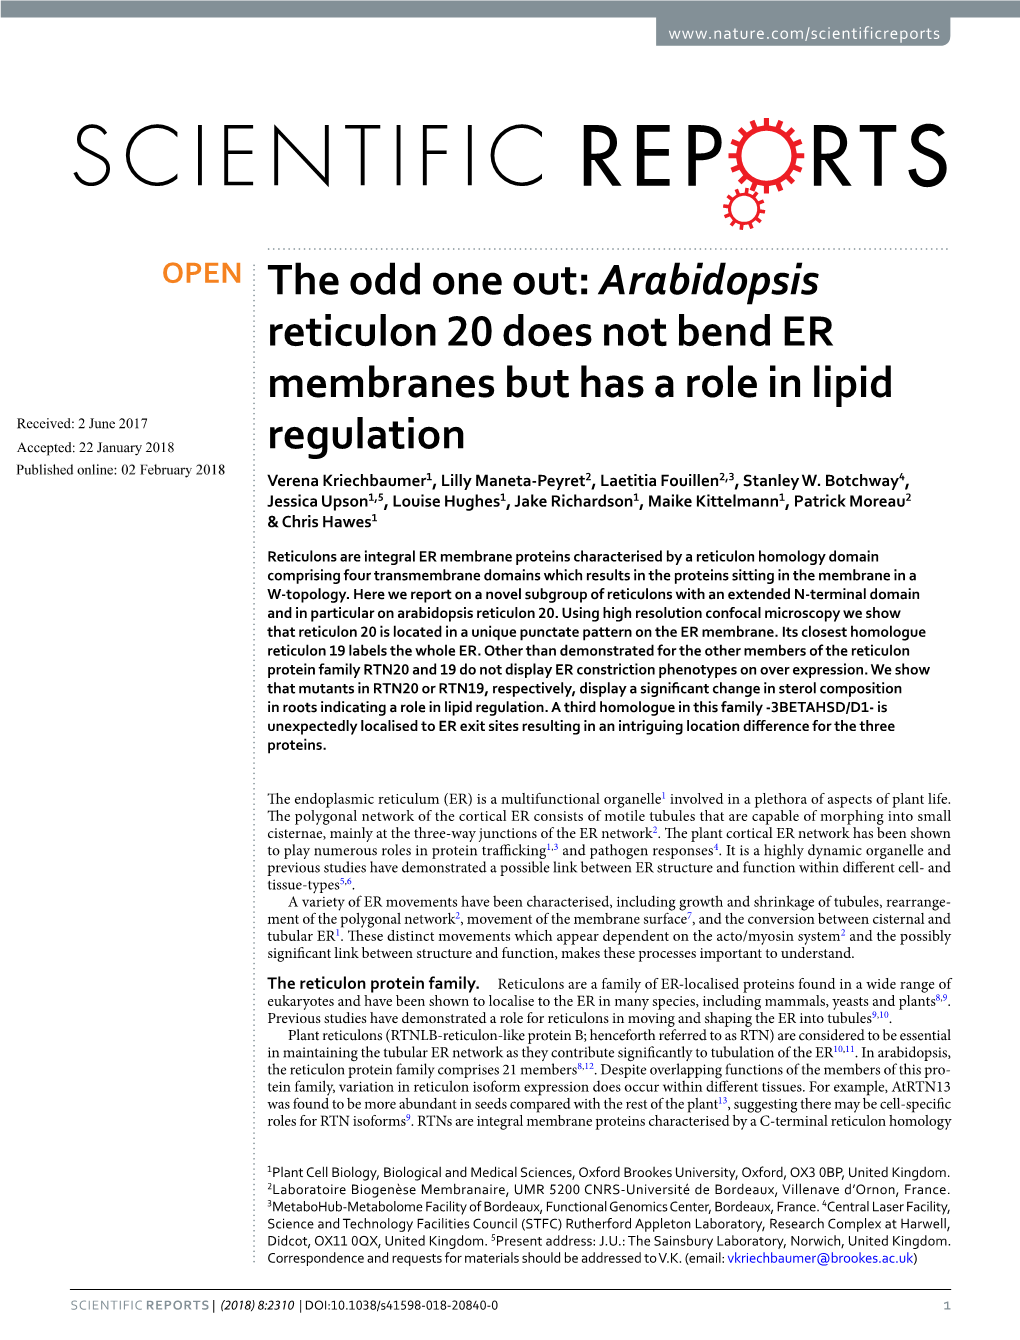 Arabidopsis Reticulon 20 Does Not Bend ER Membranes but Has a Role